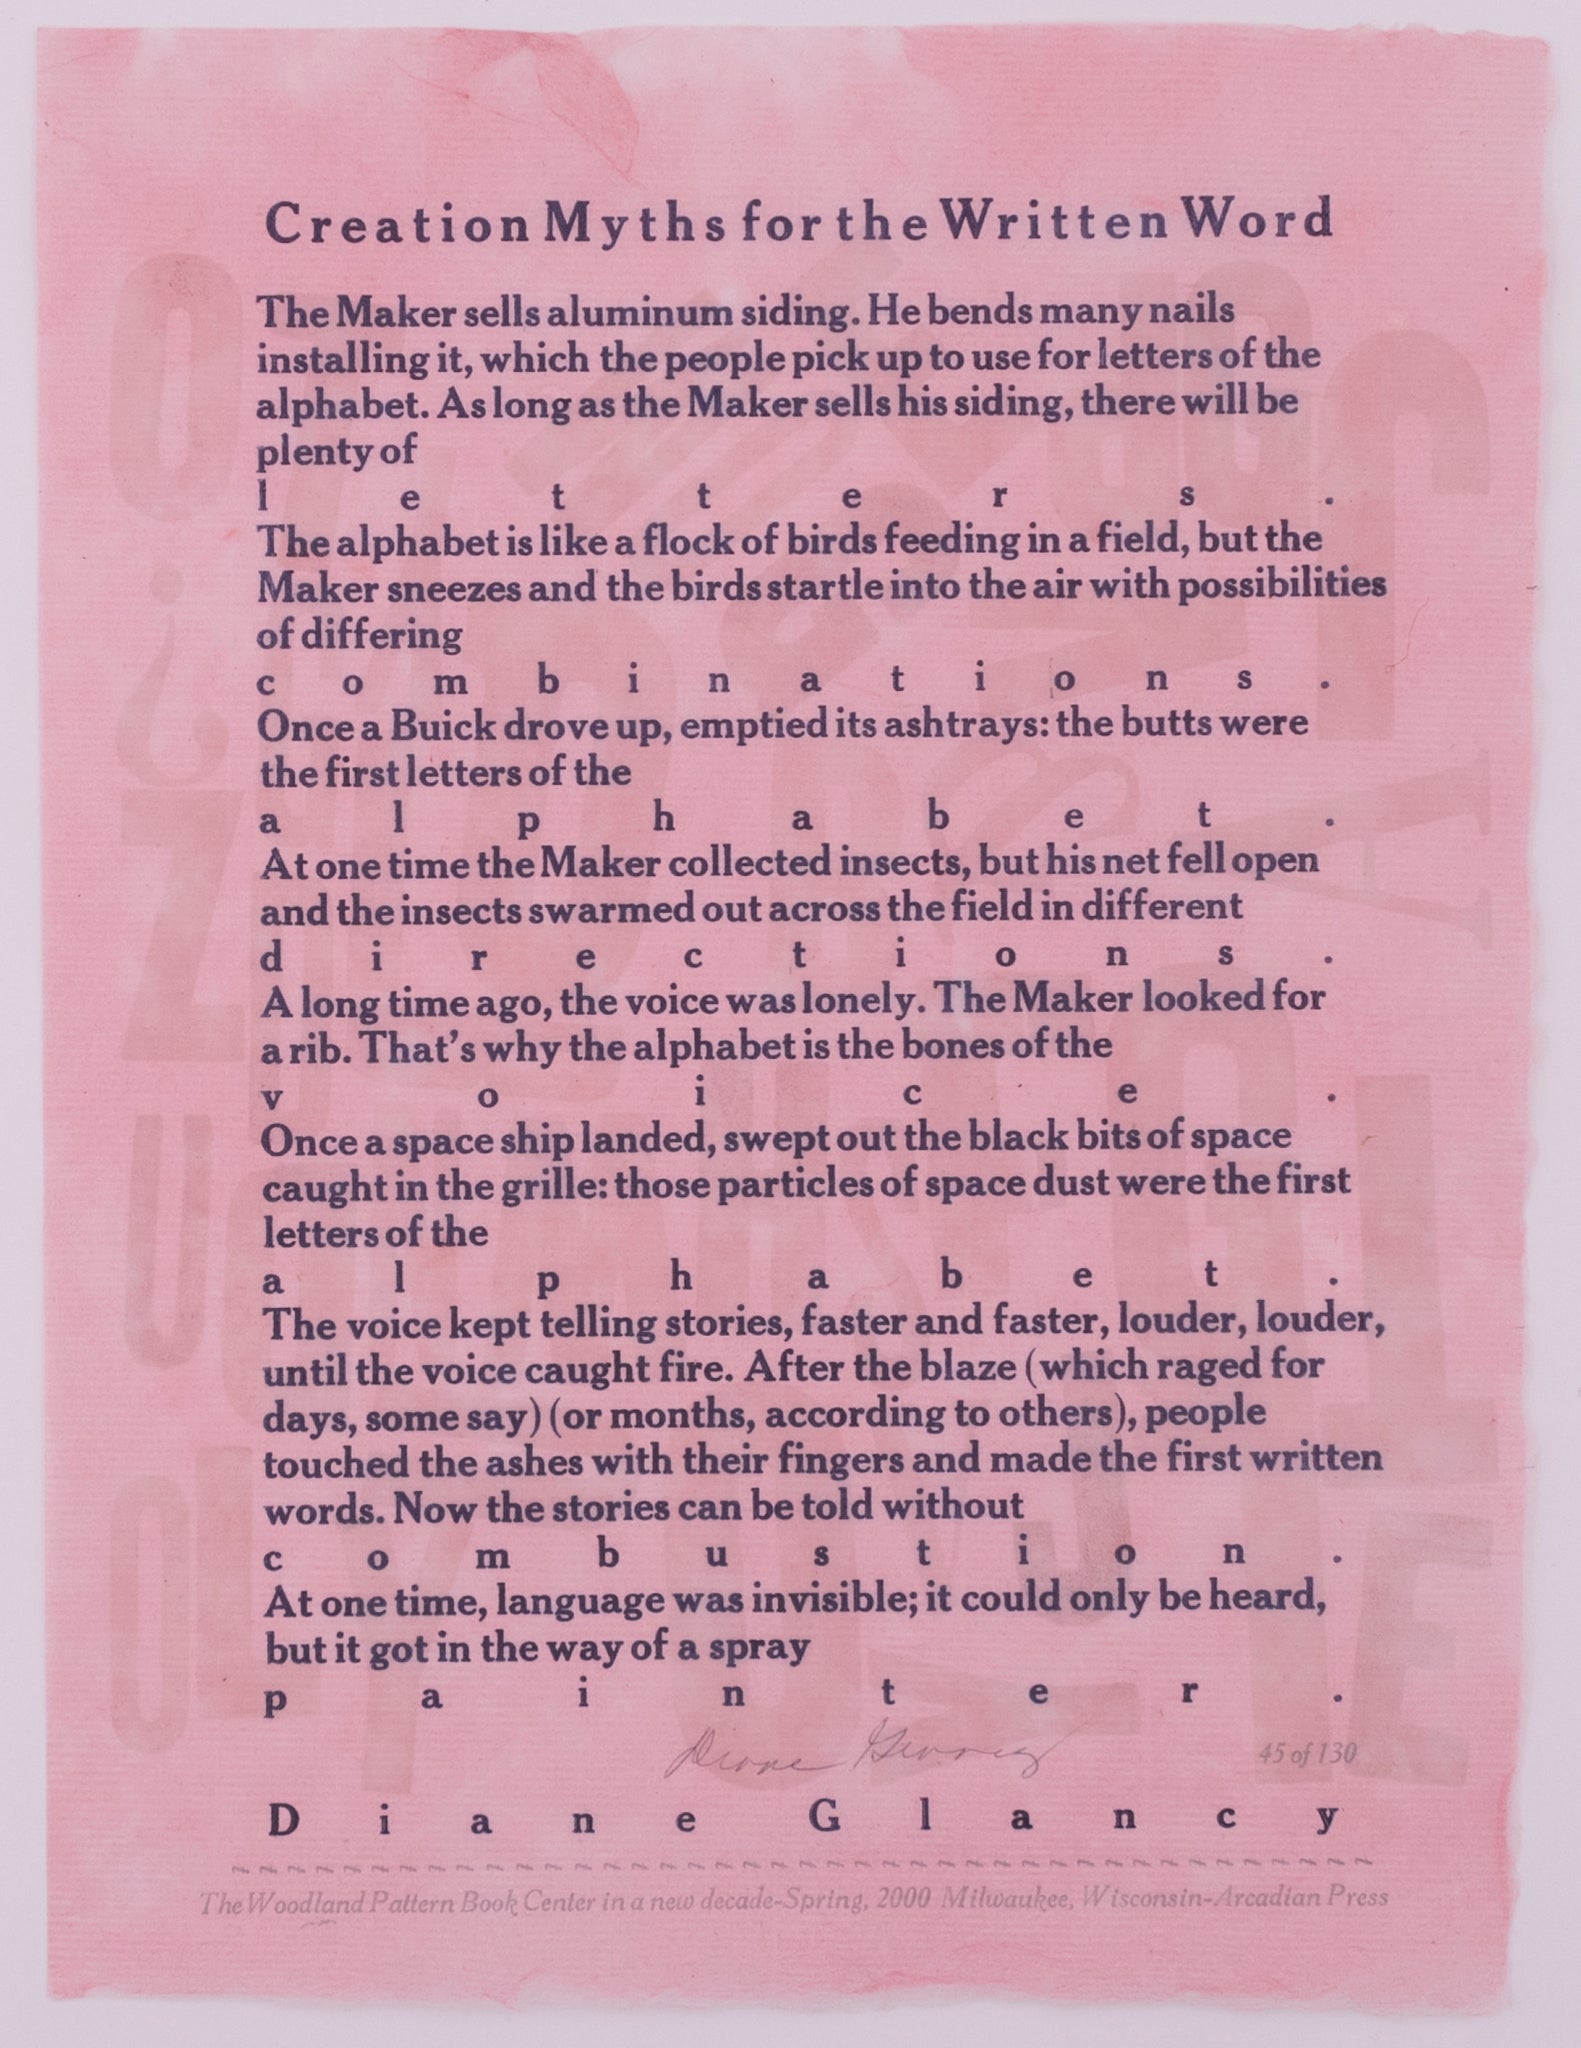 Broadside by Diane Glancy titled Creation Myths for the Written Word. Dark blue text on pink handmade paper. The paper has barely visible imprints of large letters scattered around creating a textured background.